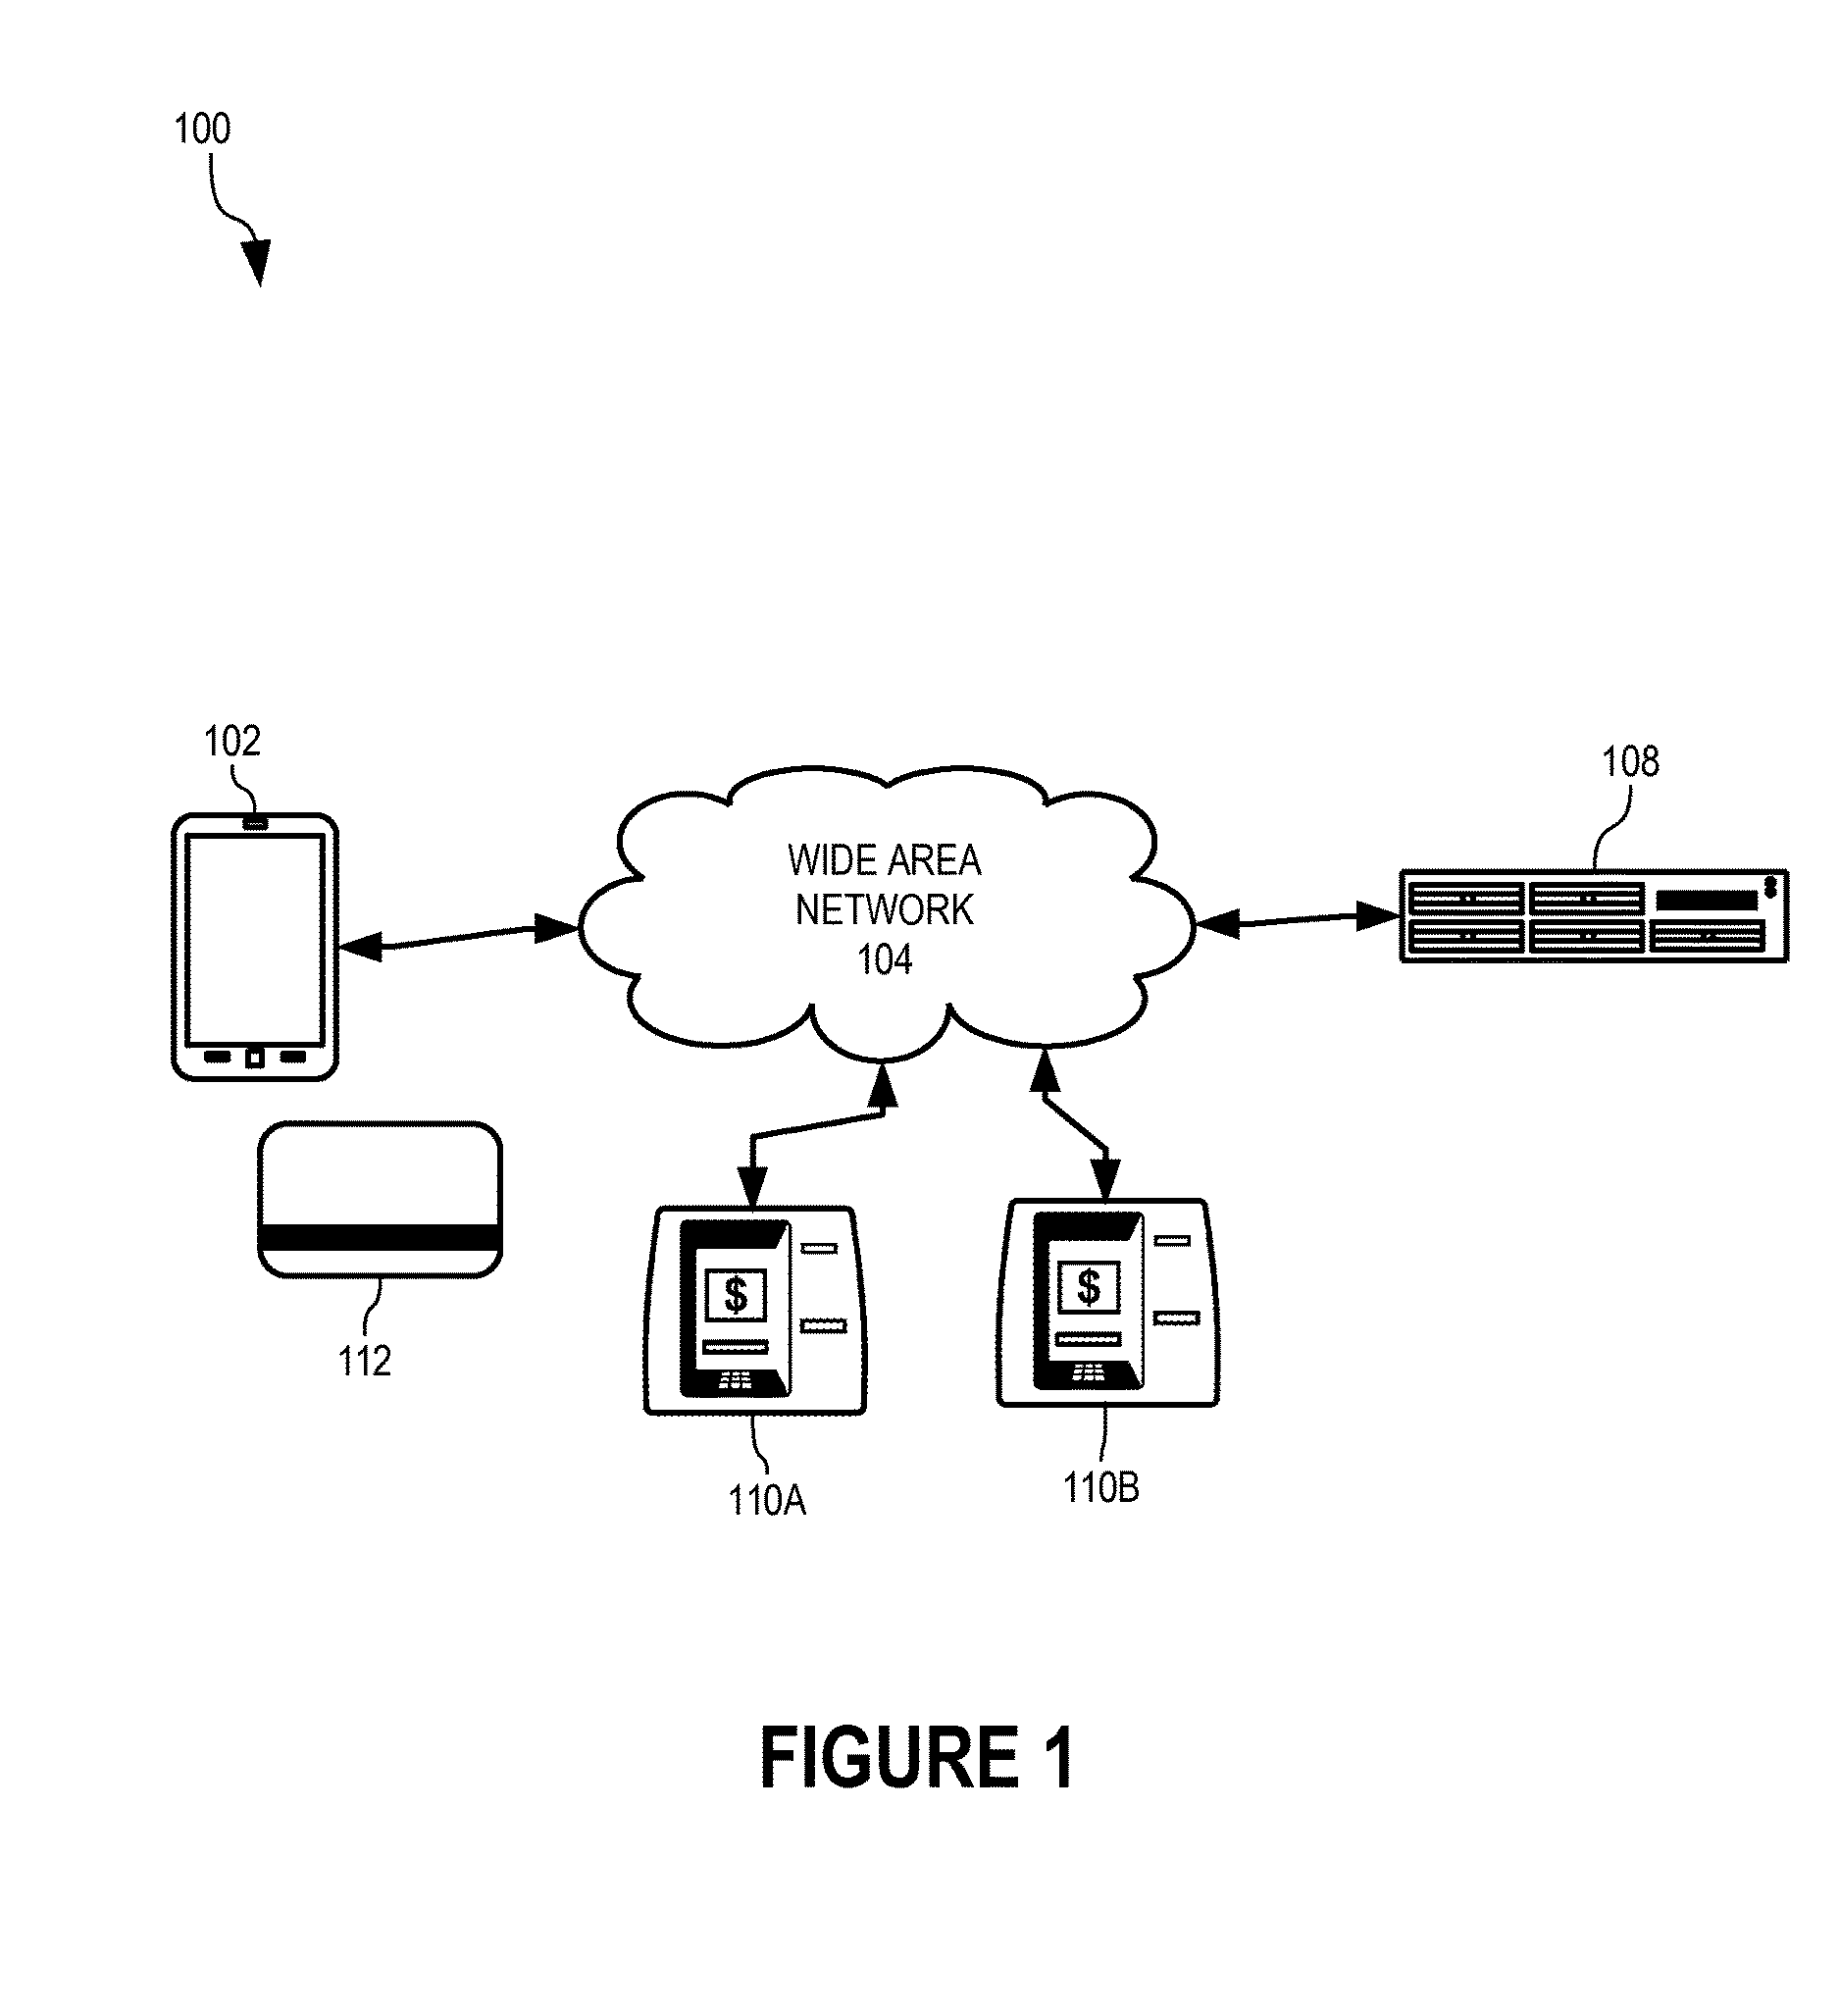 Automatic teller machine inventory and distribution system